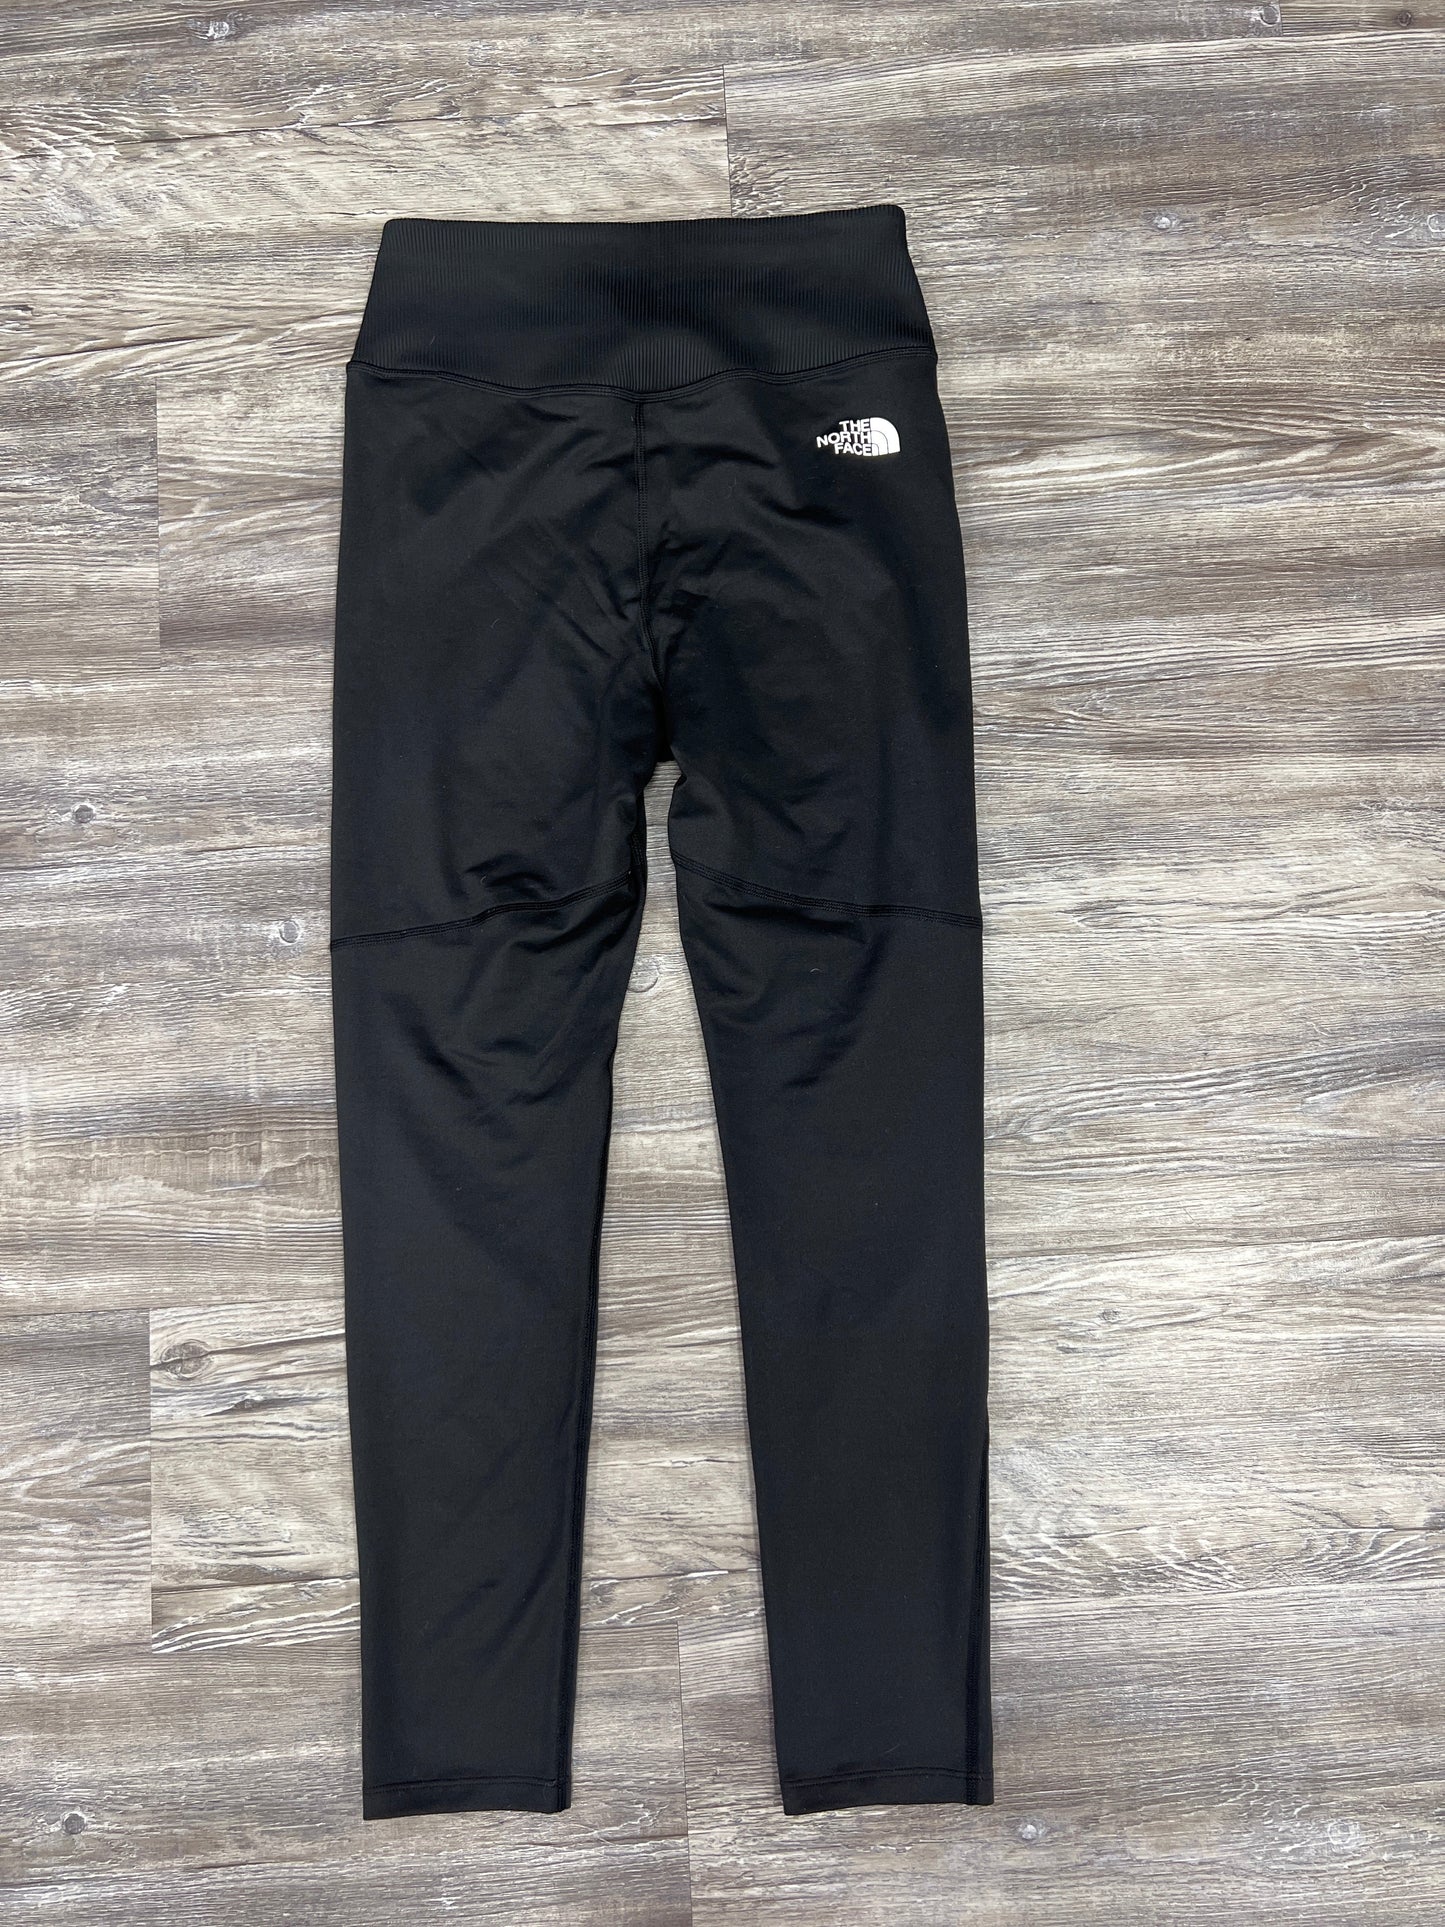 Black Athletic Leggings The North Face, Size M